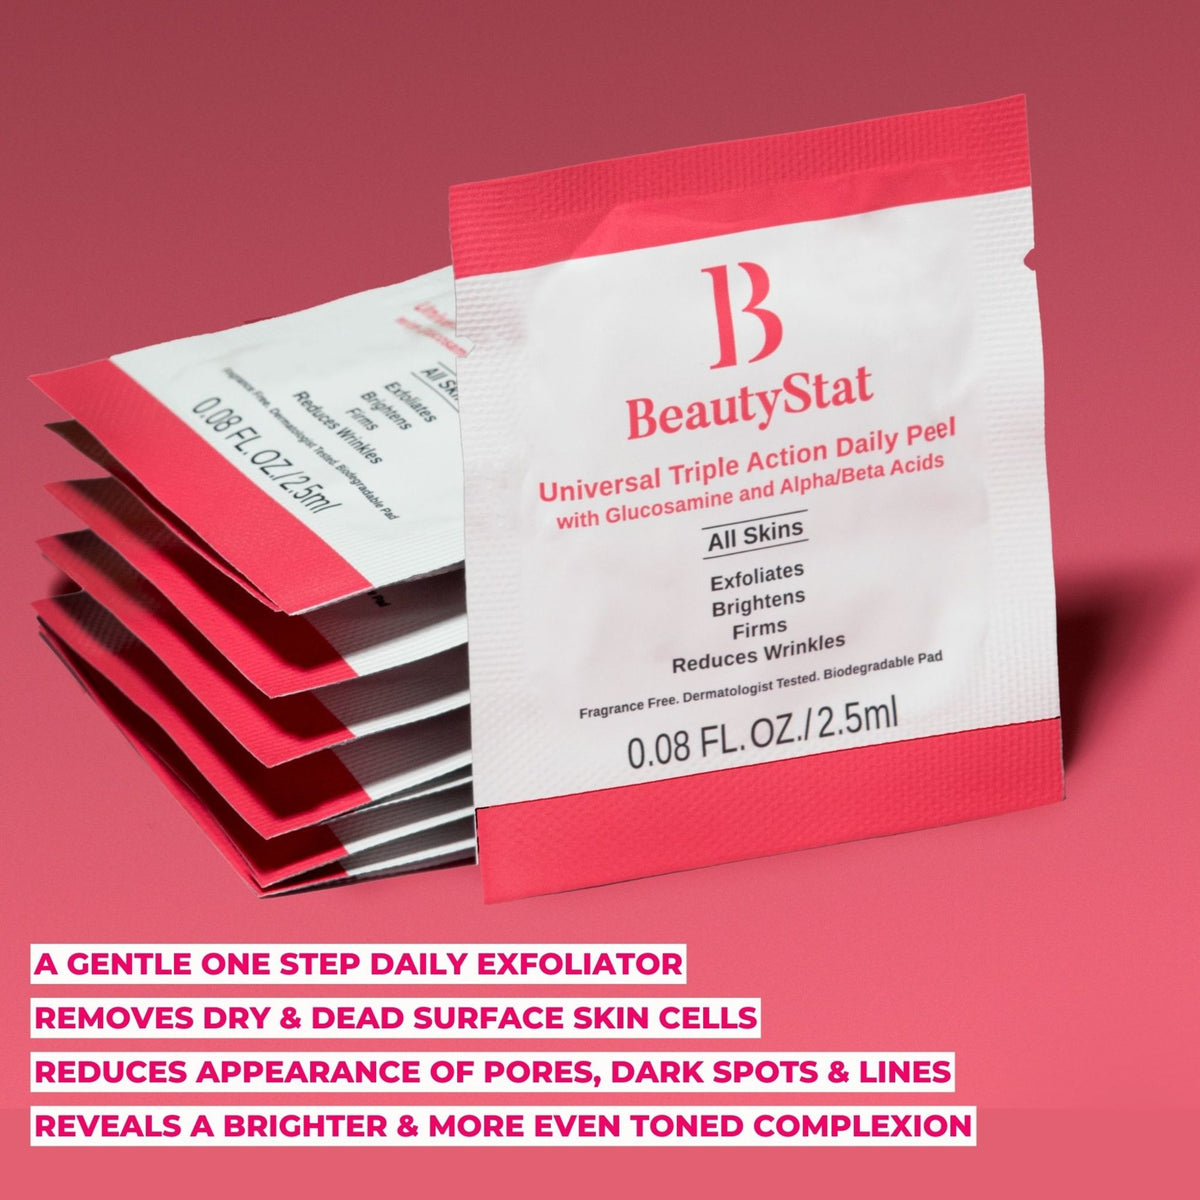 BeautyStat Universal Triple Action Daily Peel with Glucosamine and AHAs/BHAs .